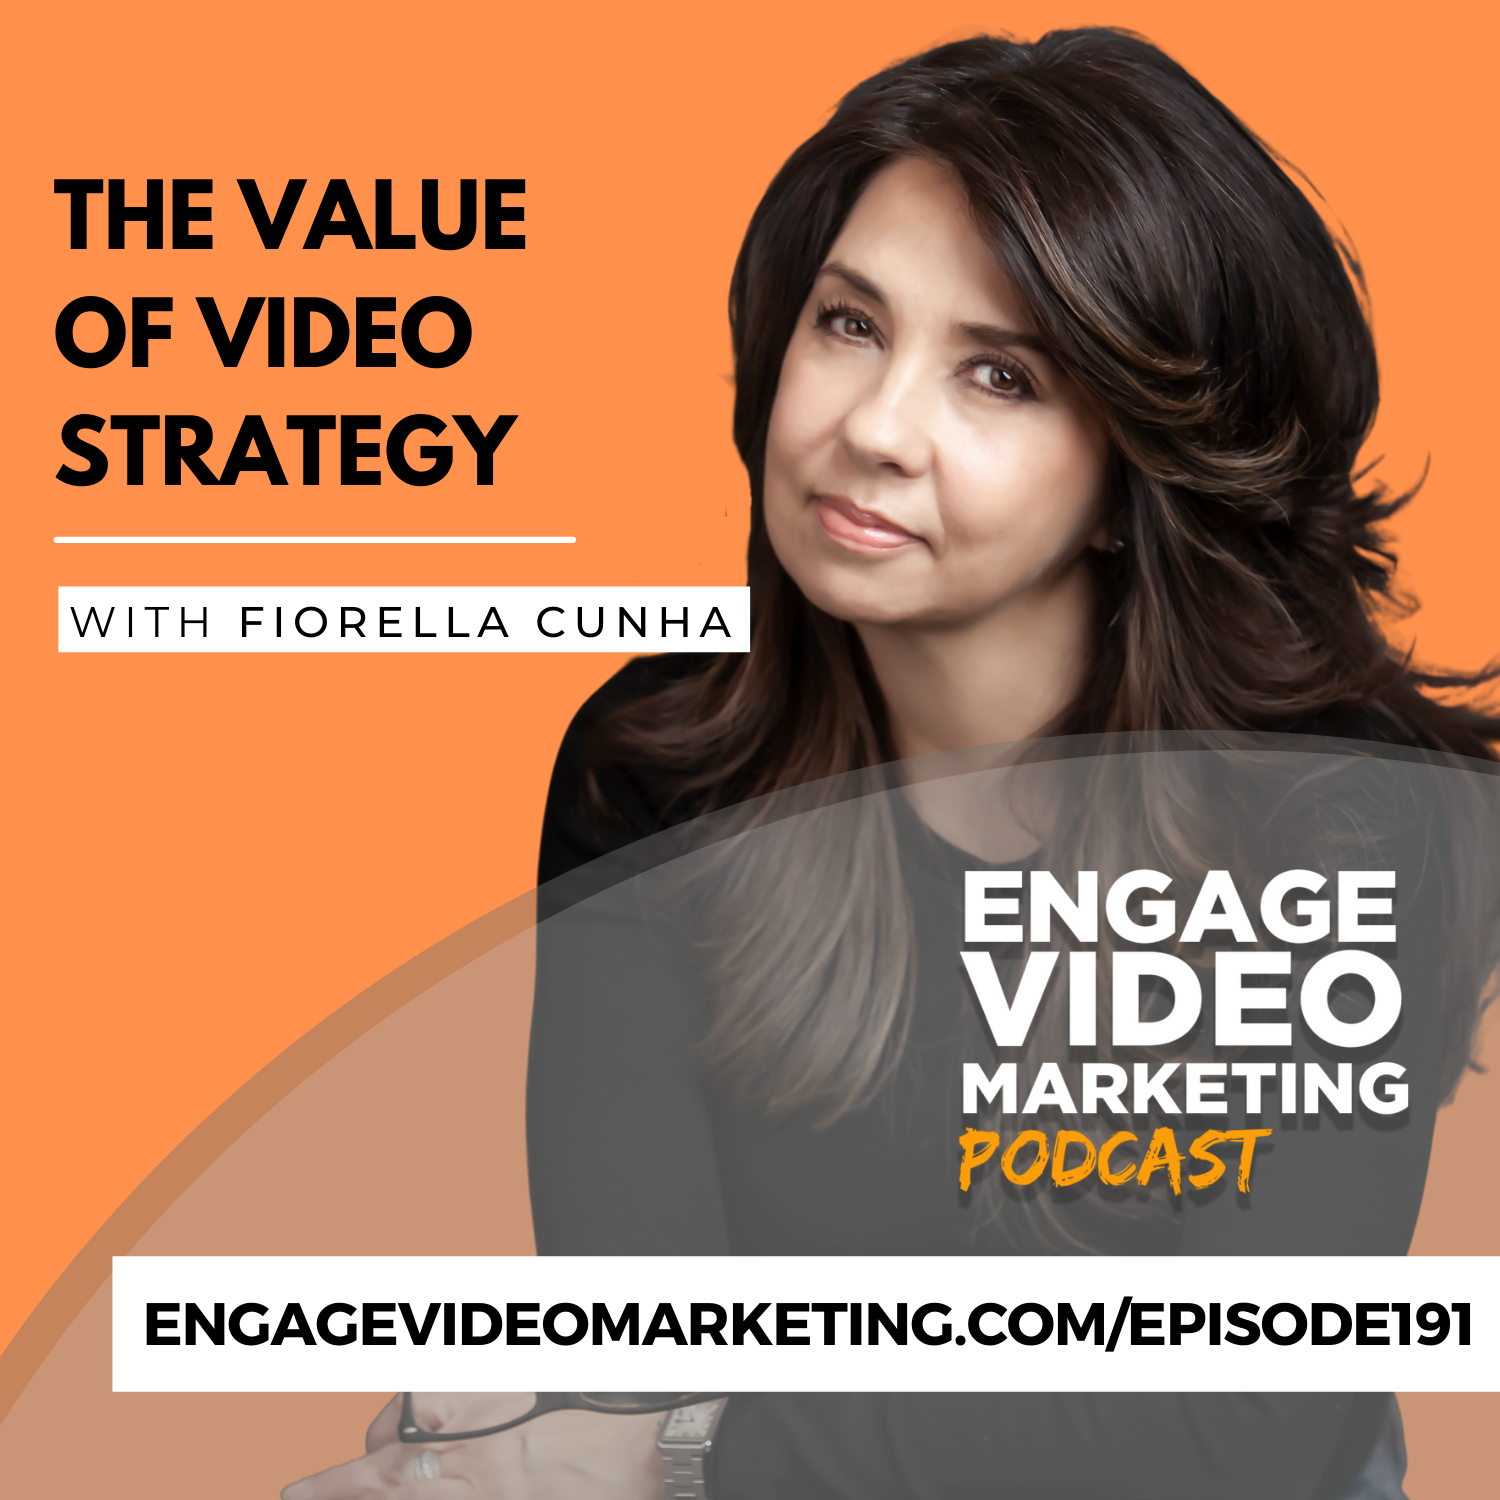 The Value of Video Strategy with Fiorella Cunha